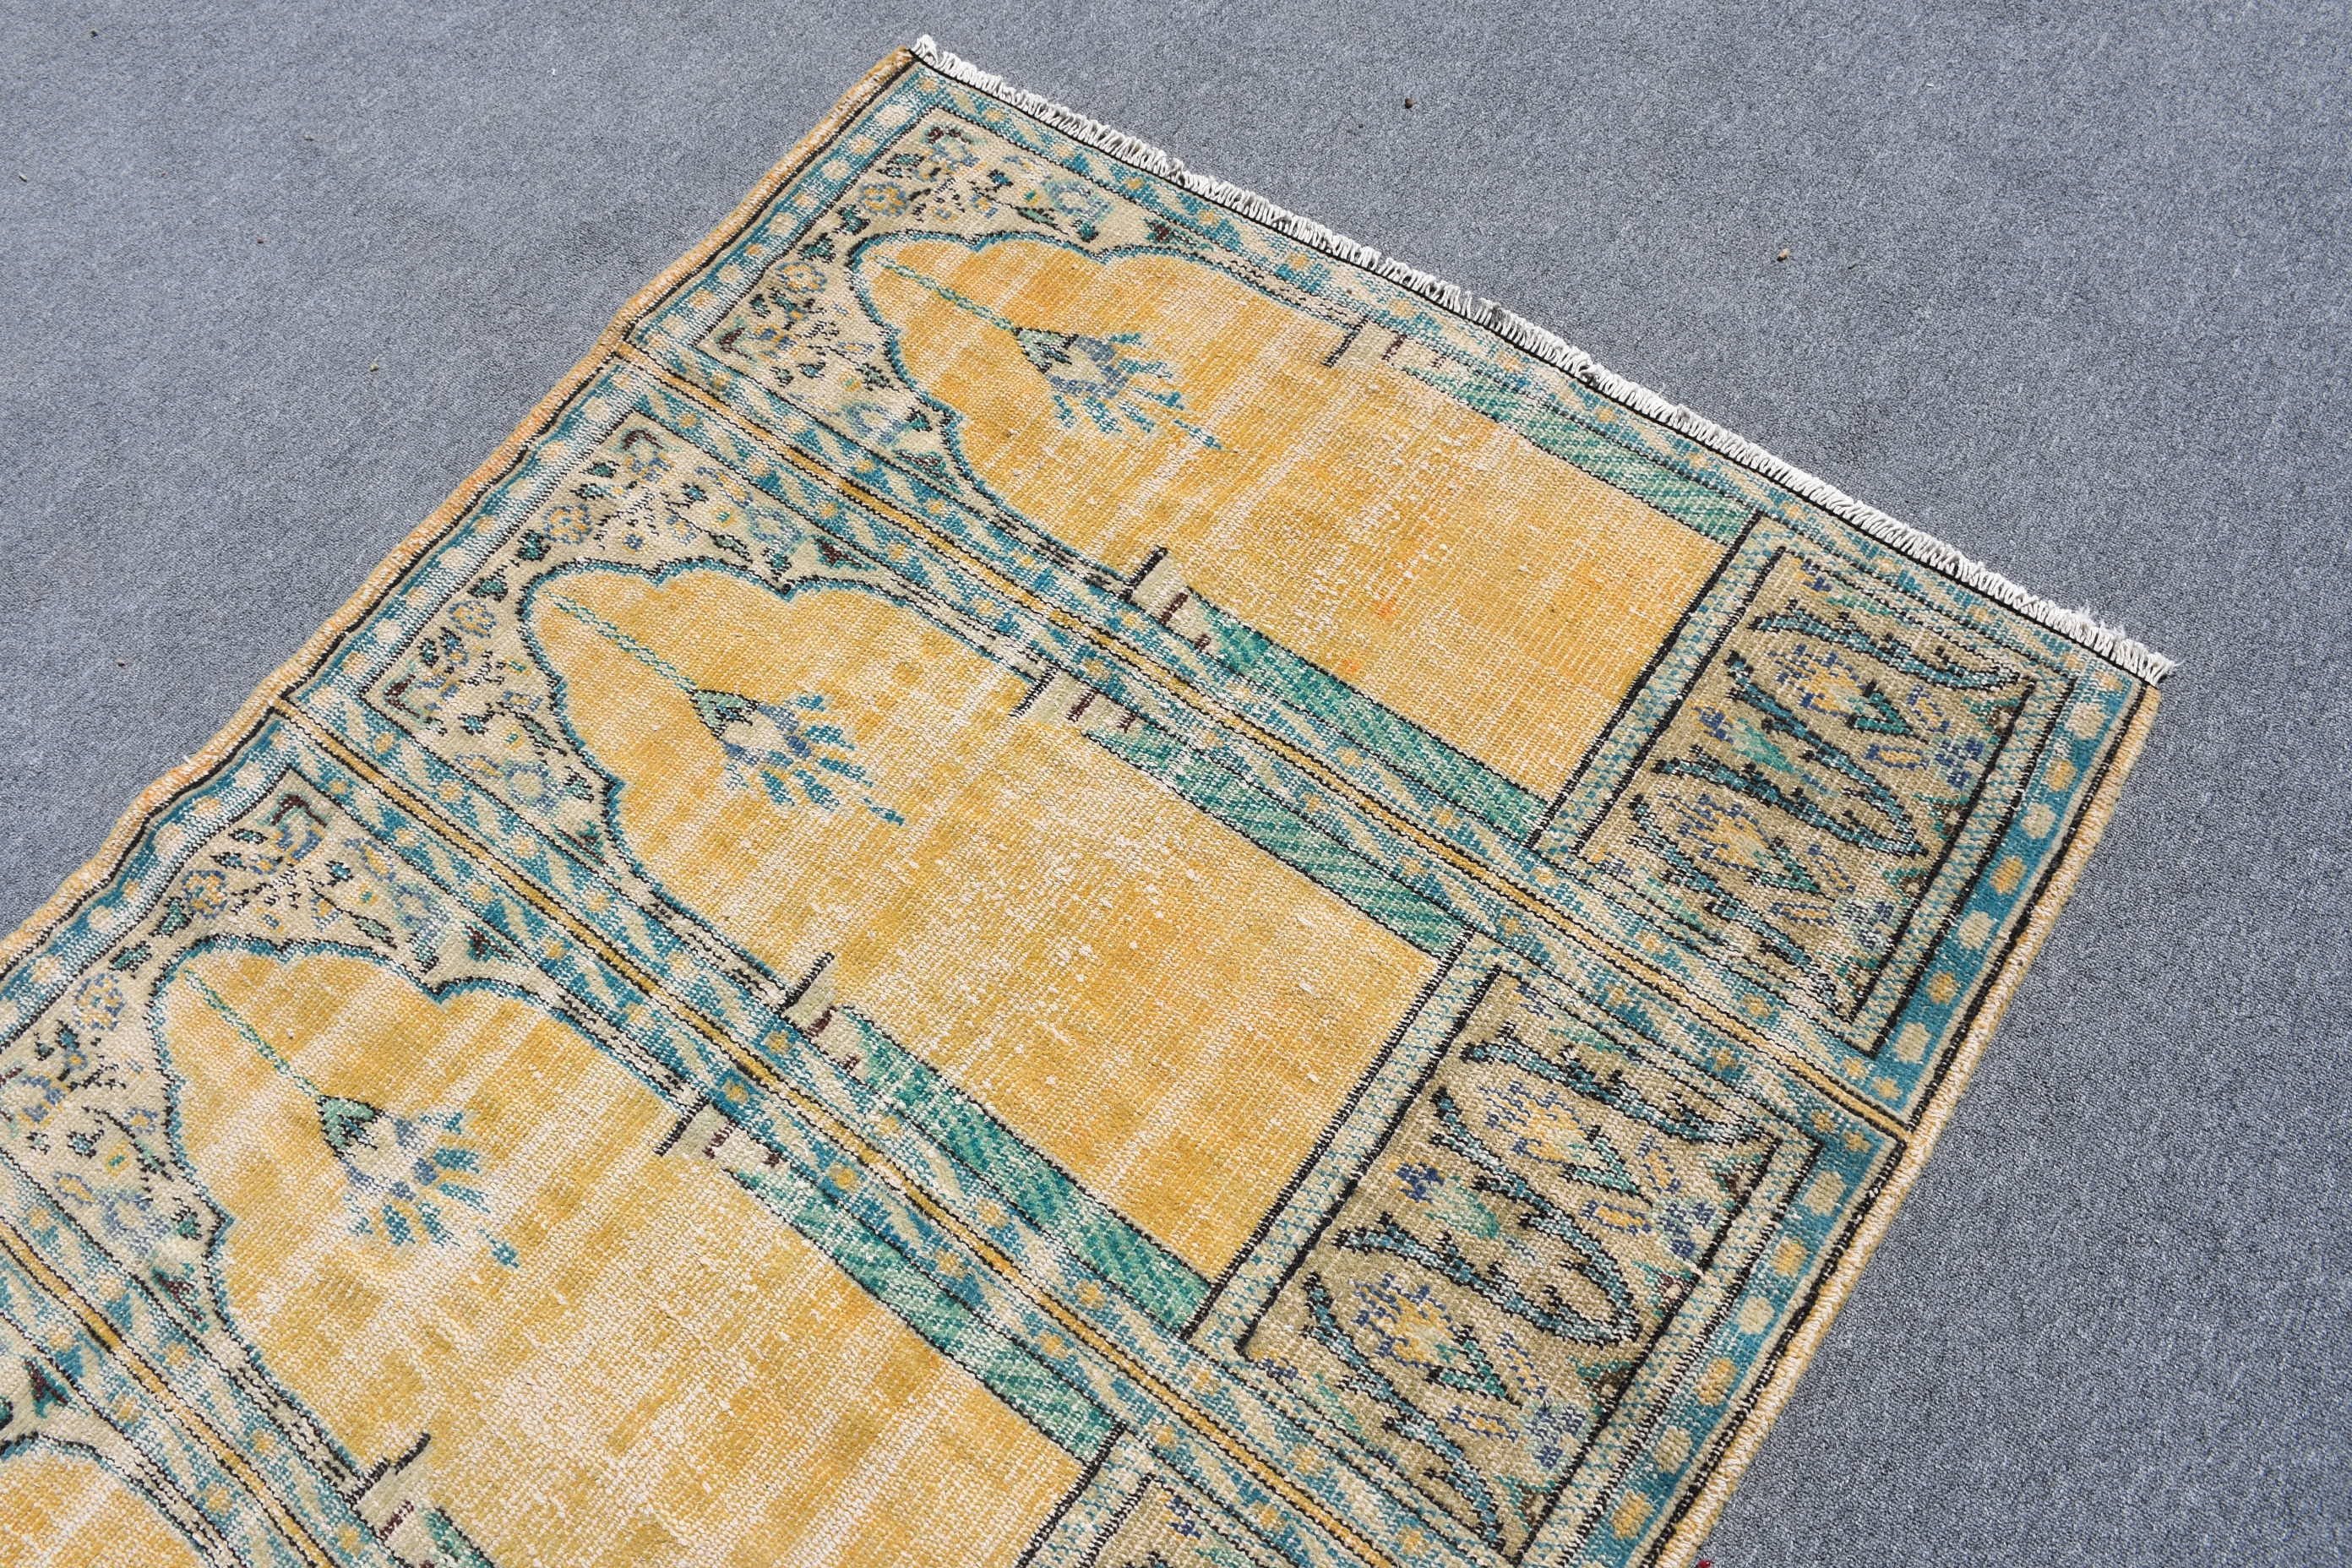 Entry Rug, Turkish Rug, Home Decor Rug, Vintage Rug, Wool Rug, 4x5.2 ft Accent Rugs, Yellow Floor Rug, Bedroom Rugs, Rugs for Entry